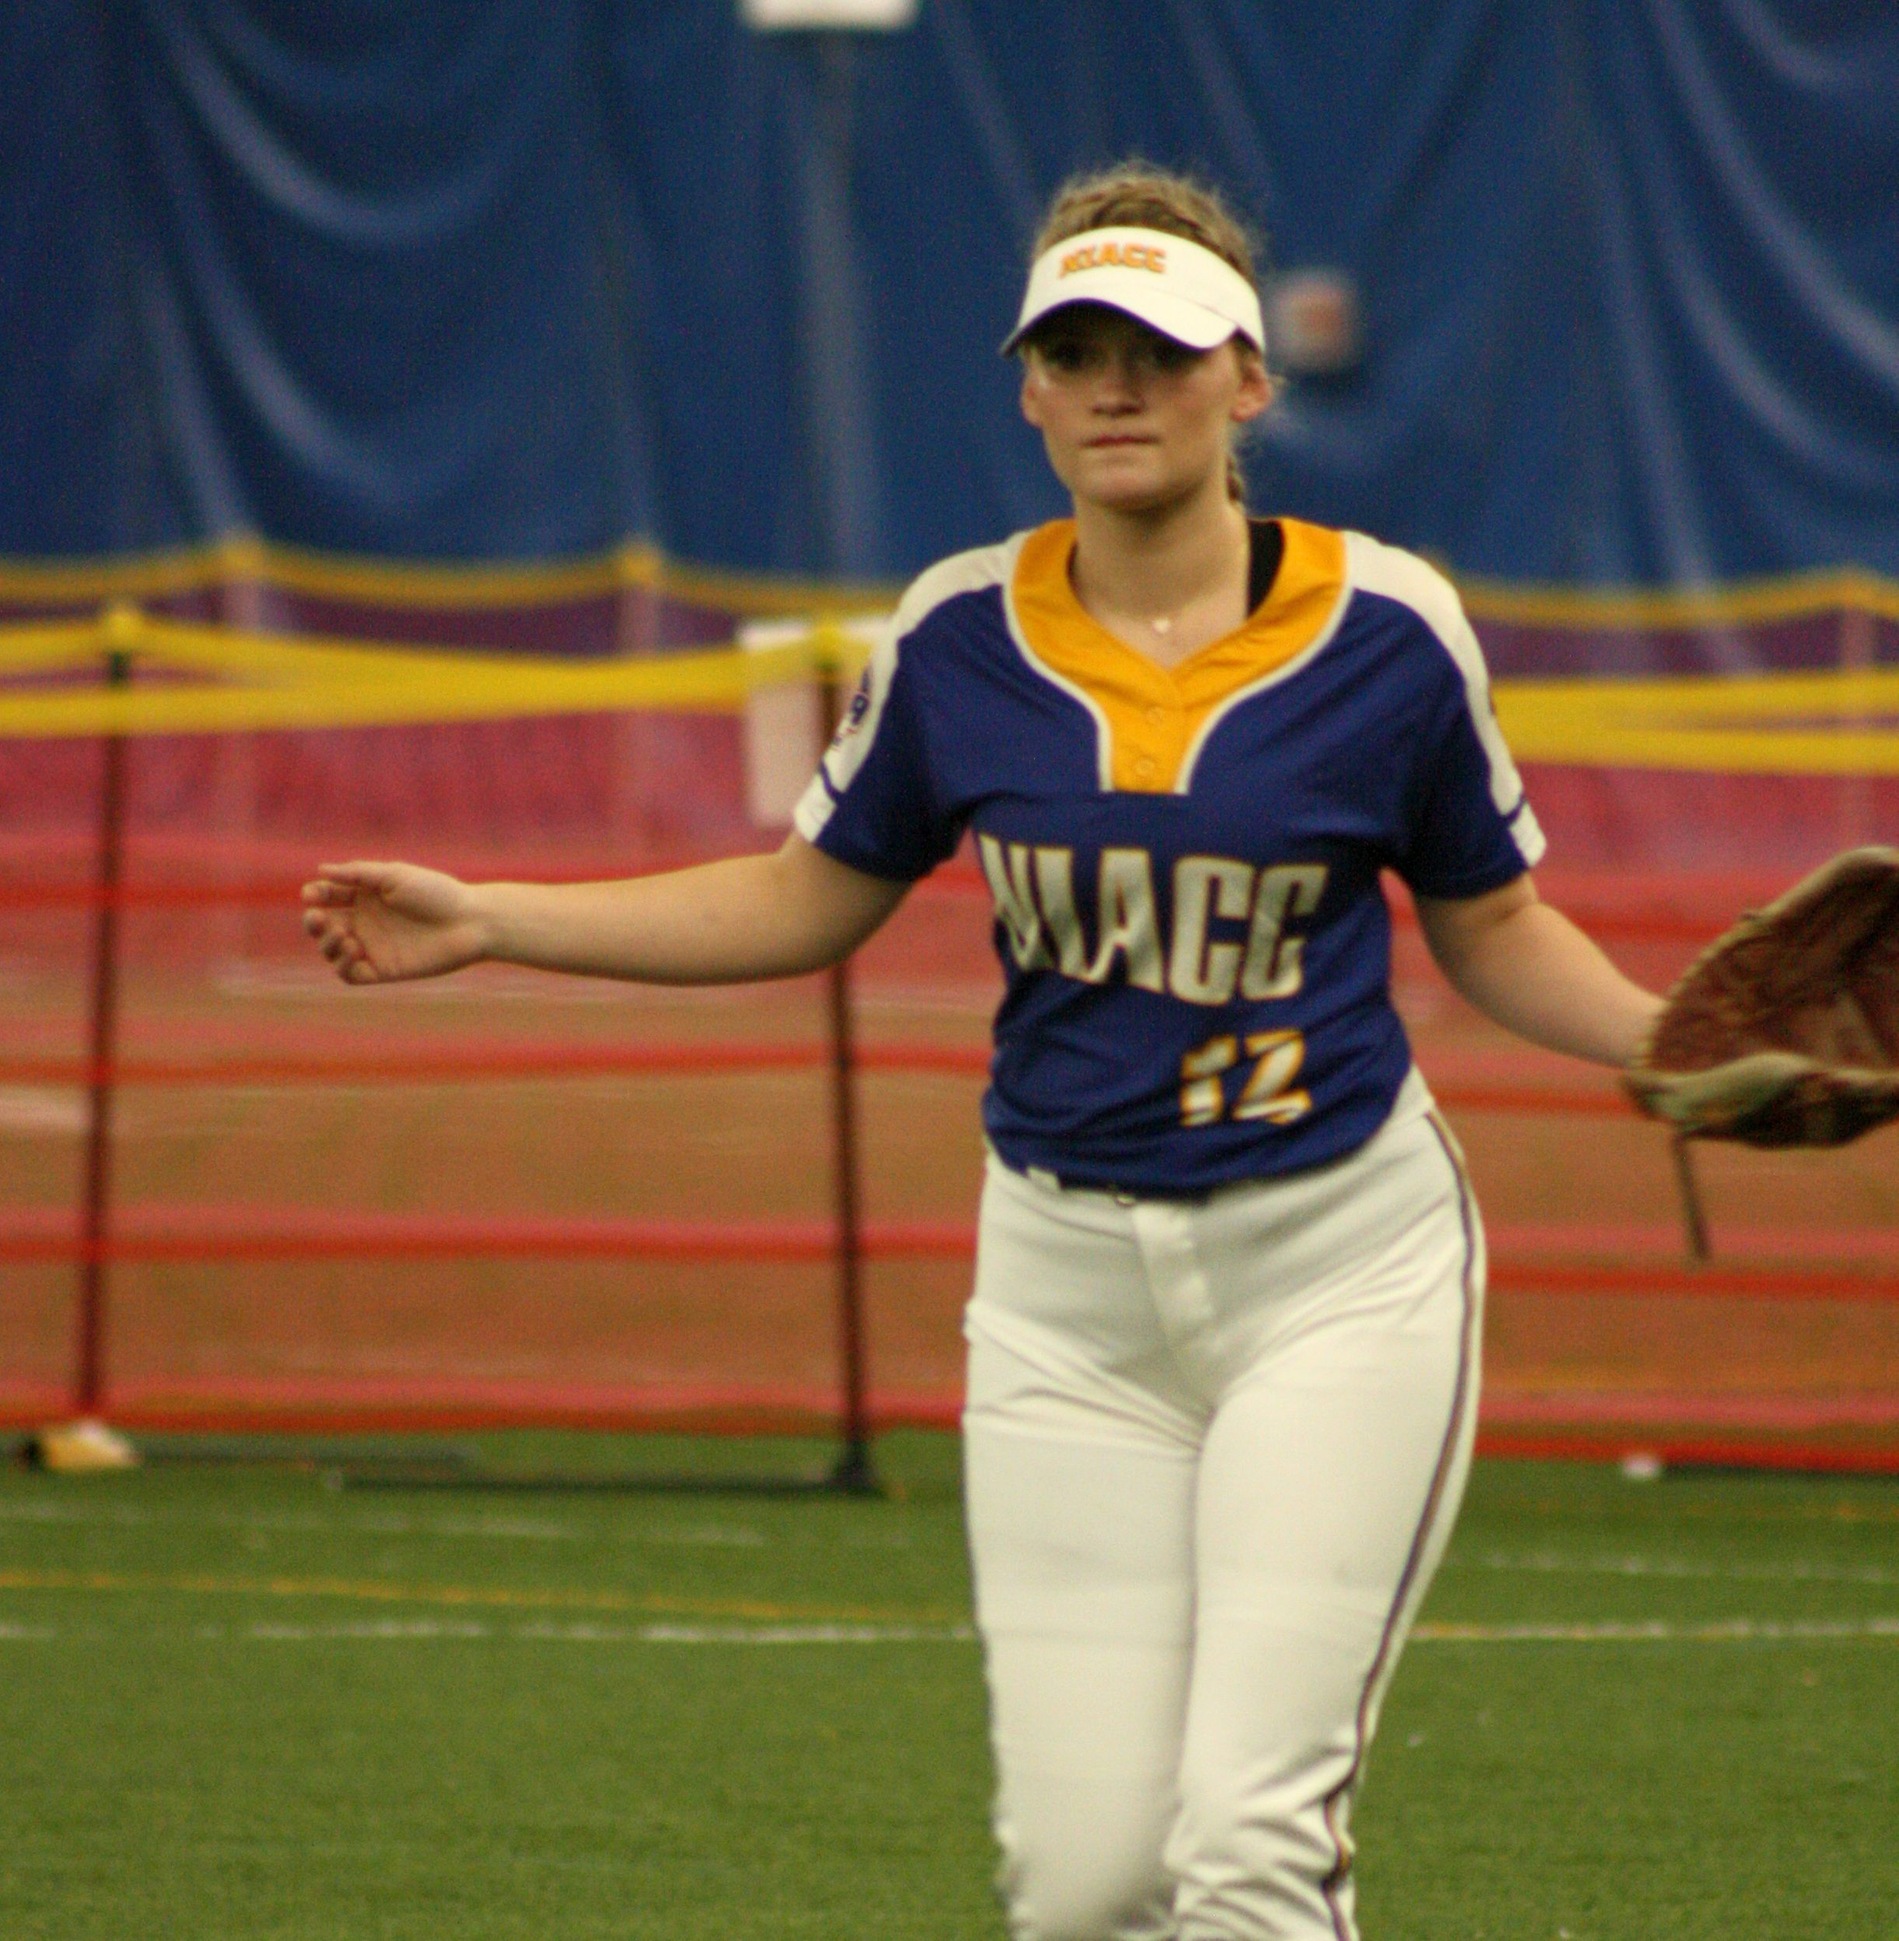 NIACC sophomore infielder Brynnlin Kroymann gets ready for the pitch during a game earlier this season.